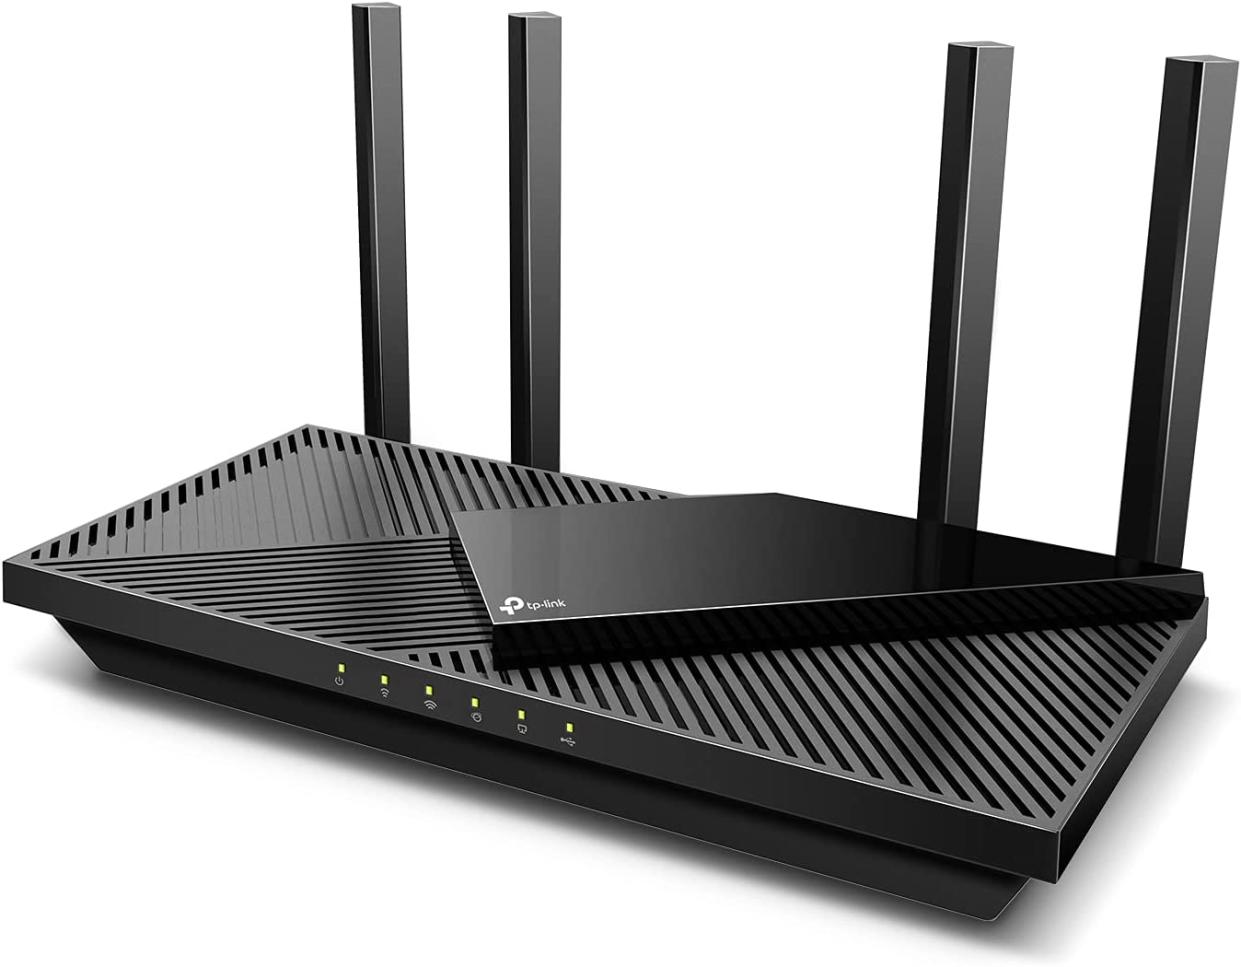 The TP-Link AX3000.